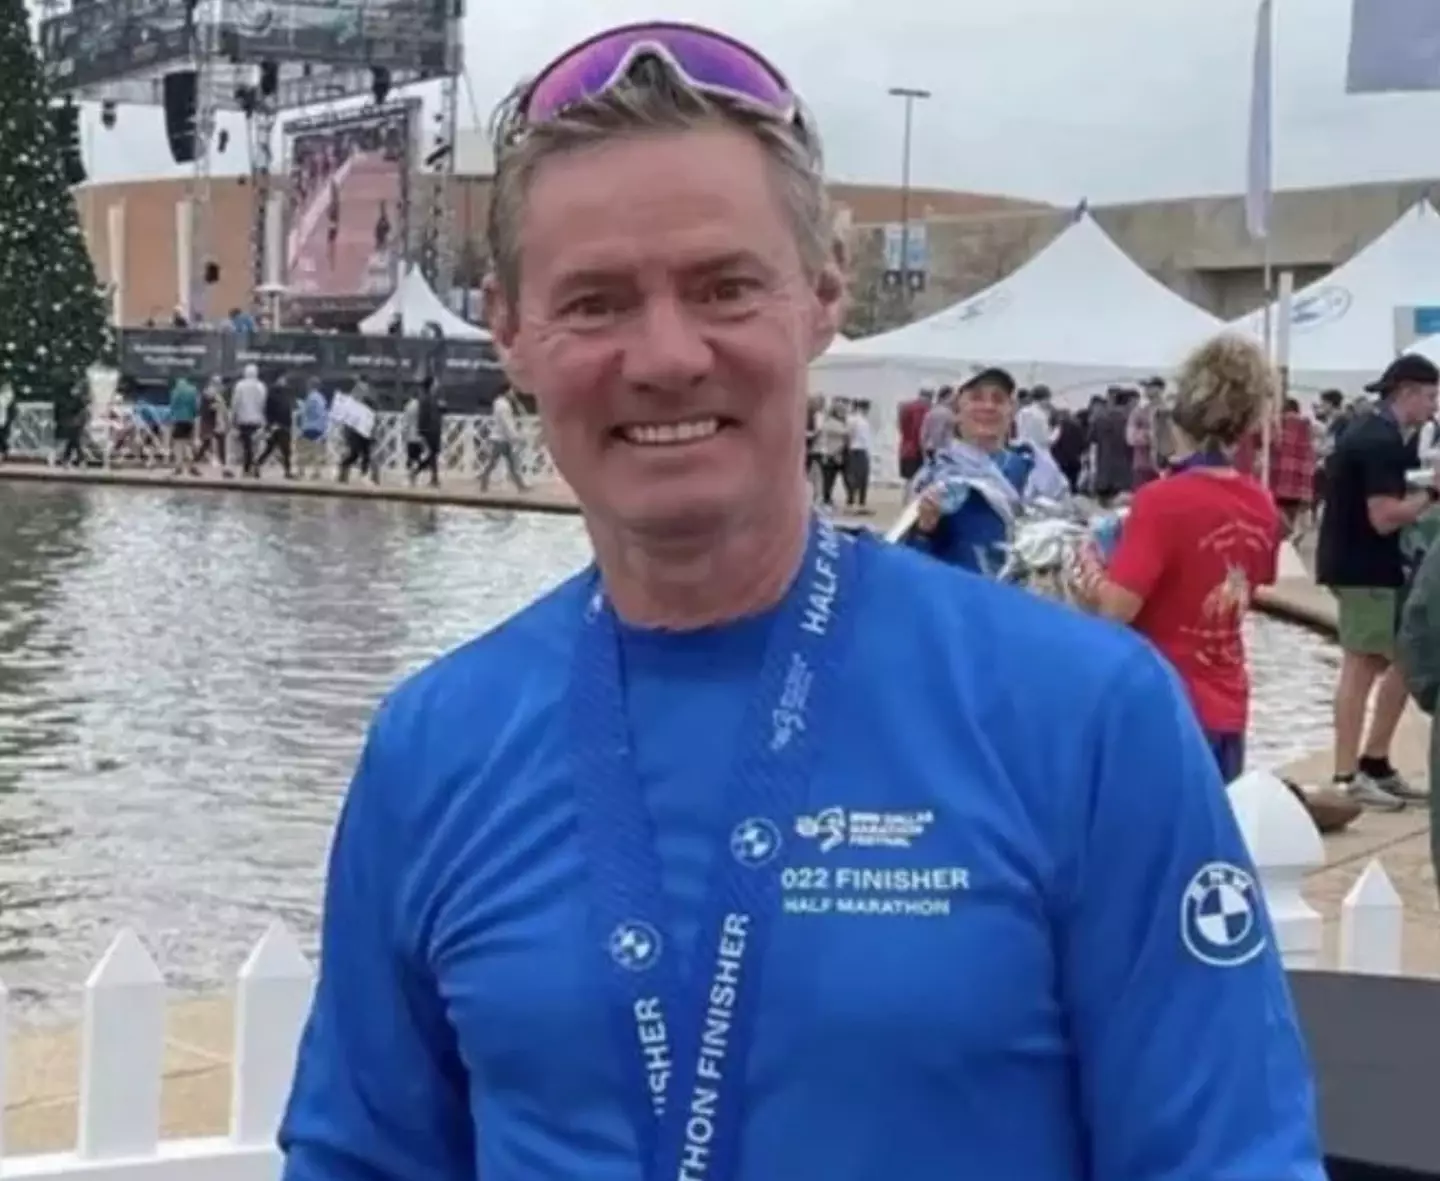 Ivan Chittenden died while competing in the Ironman event over the weekend.